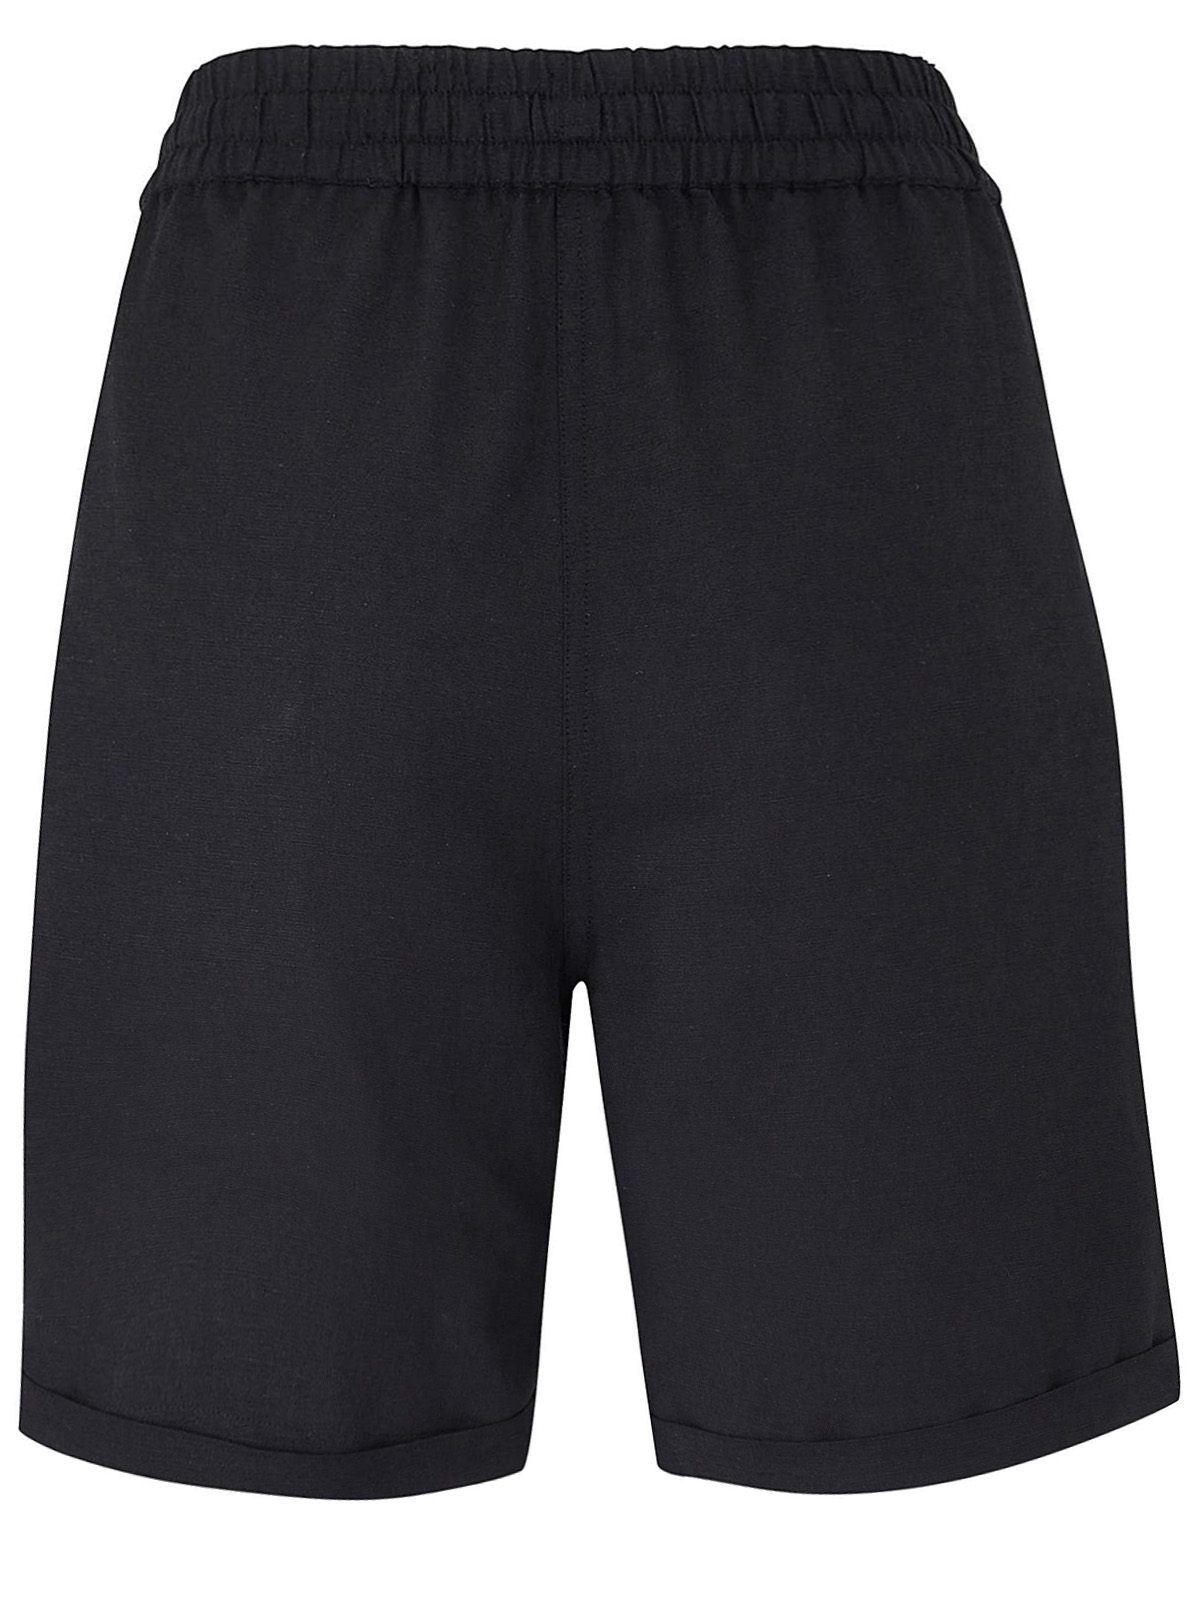 Capsule - - Capsule BLACK Linen Blend Pull On Shorts - Plus Size 16 to 32